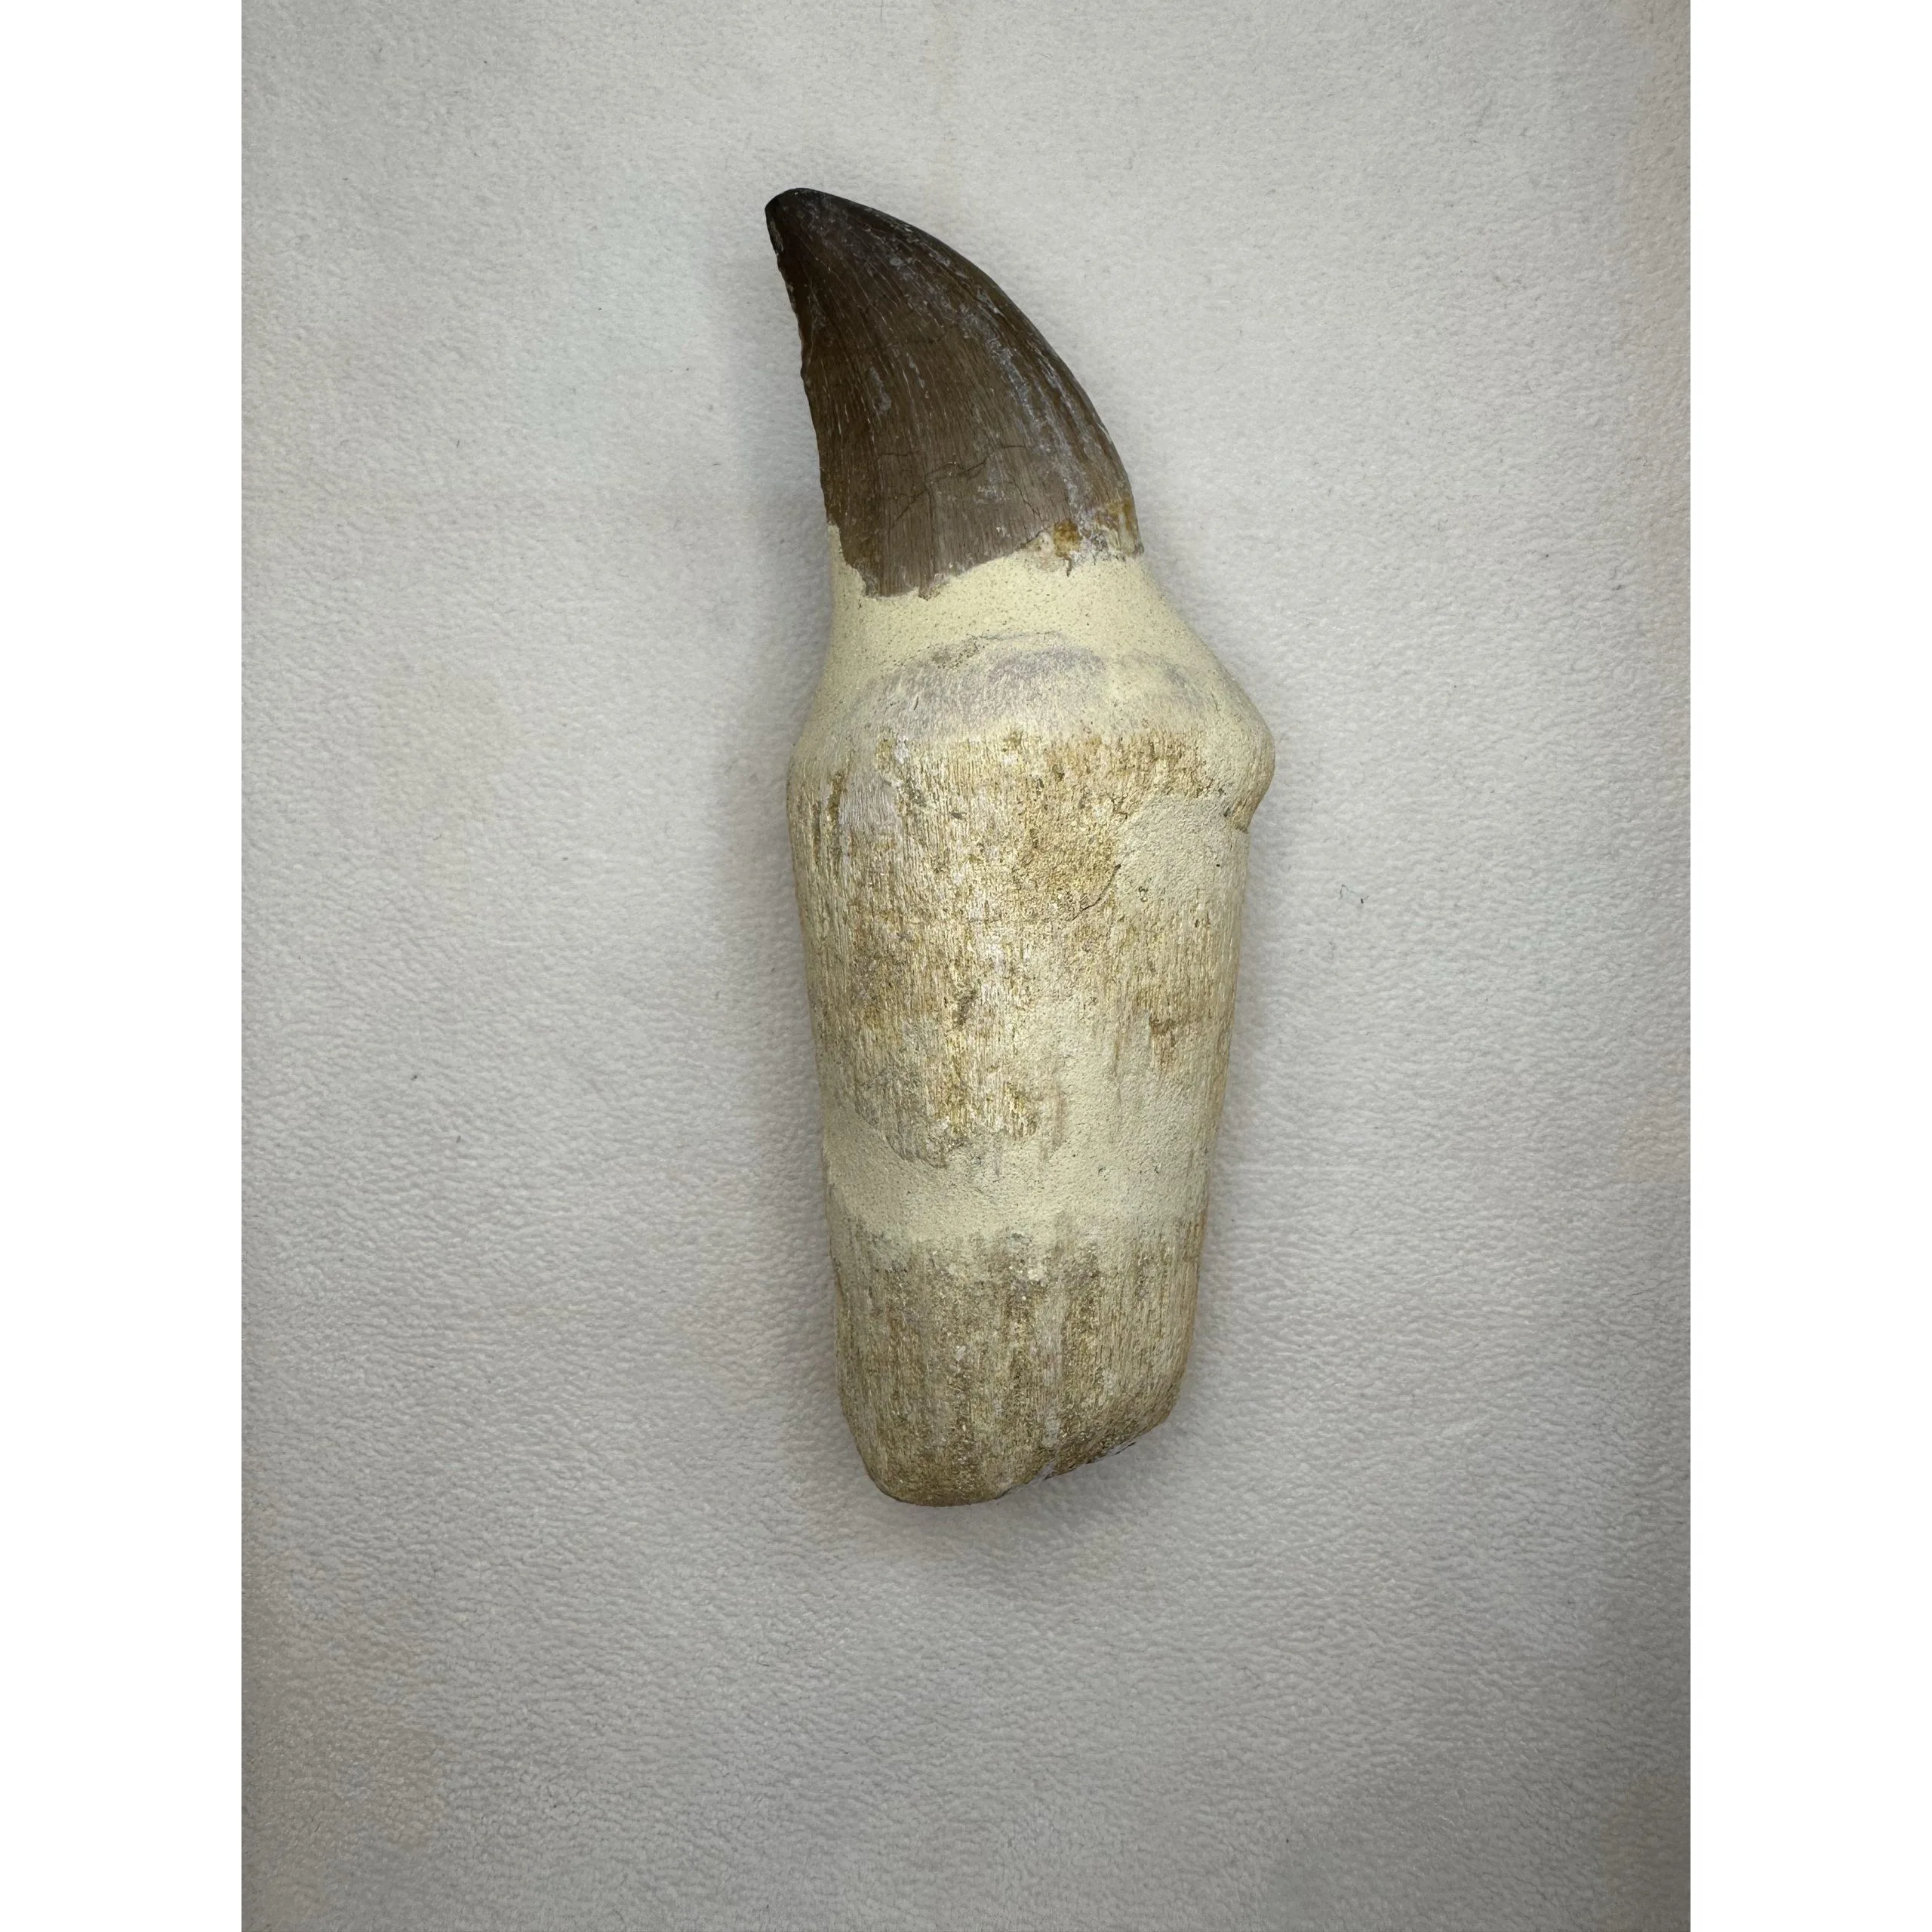 Prognathodon Anceps – Mosasaur tooth with detailed root Prehistoric Online